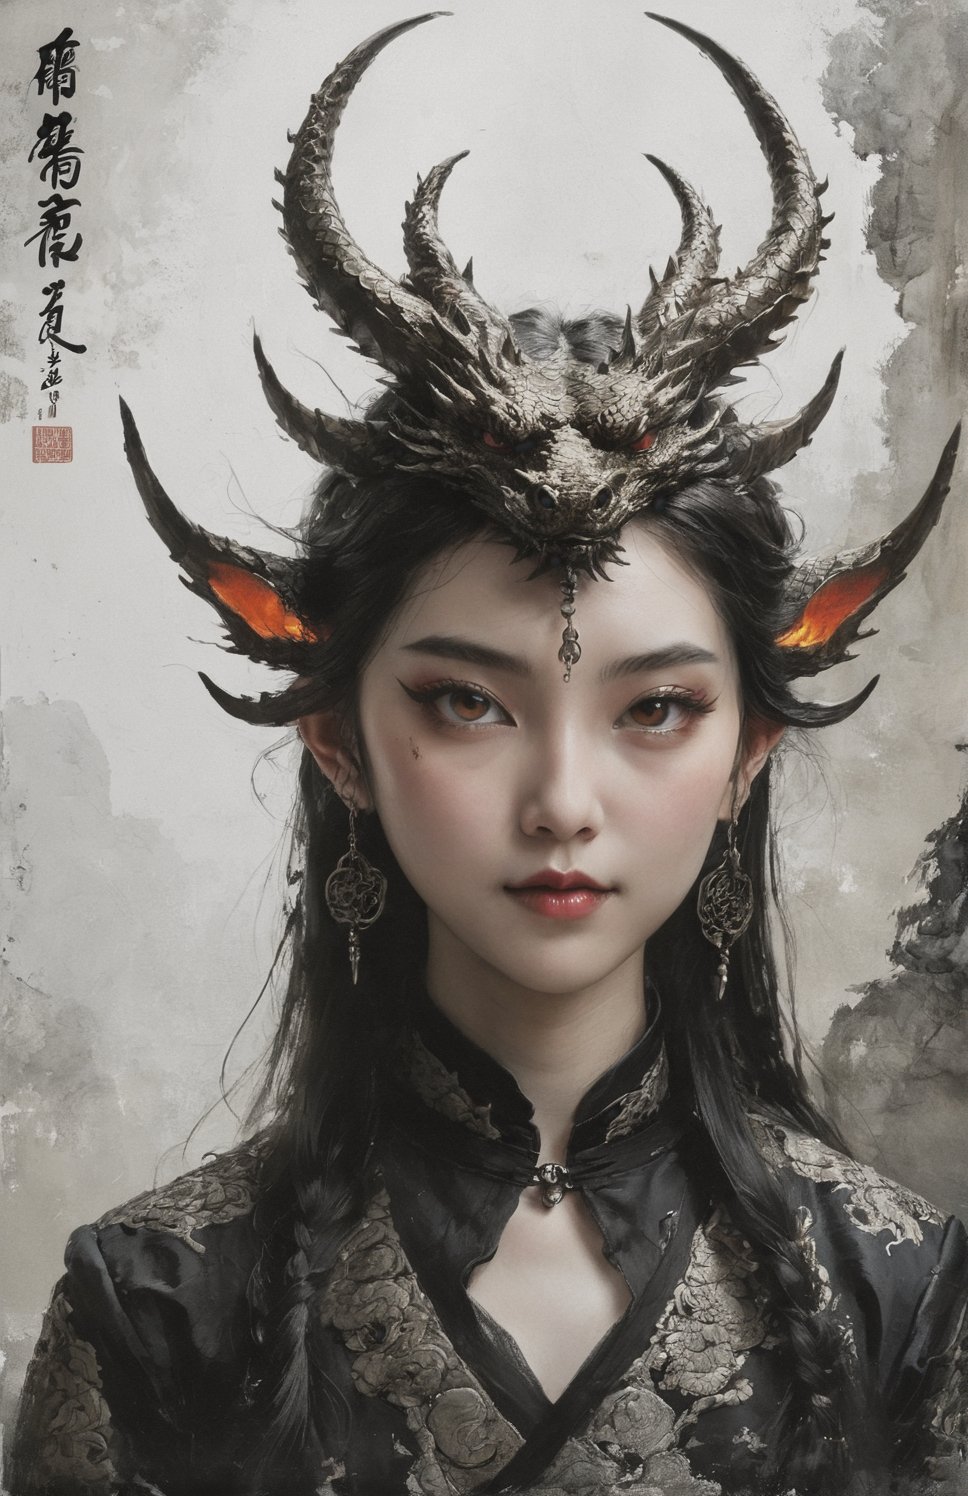 1 girl, (masterful), (long intricate horns:1.2),detailed and intricate, dragonyear, dragon-themed ,Glass Elements, looking_at_viewer,chinese girls,goth person, sfw, complex background
